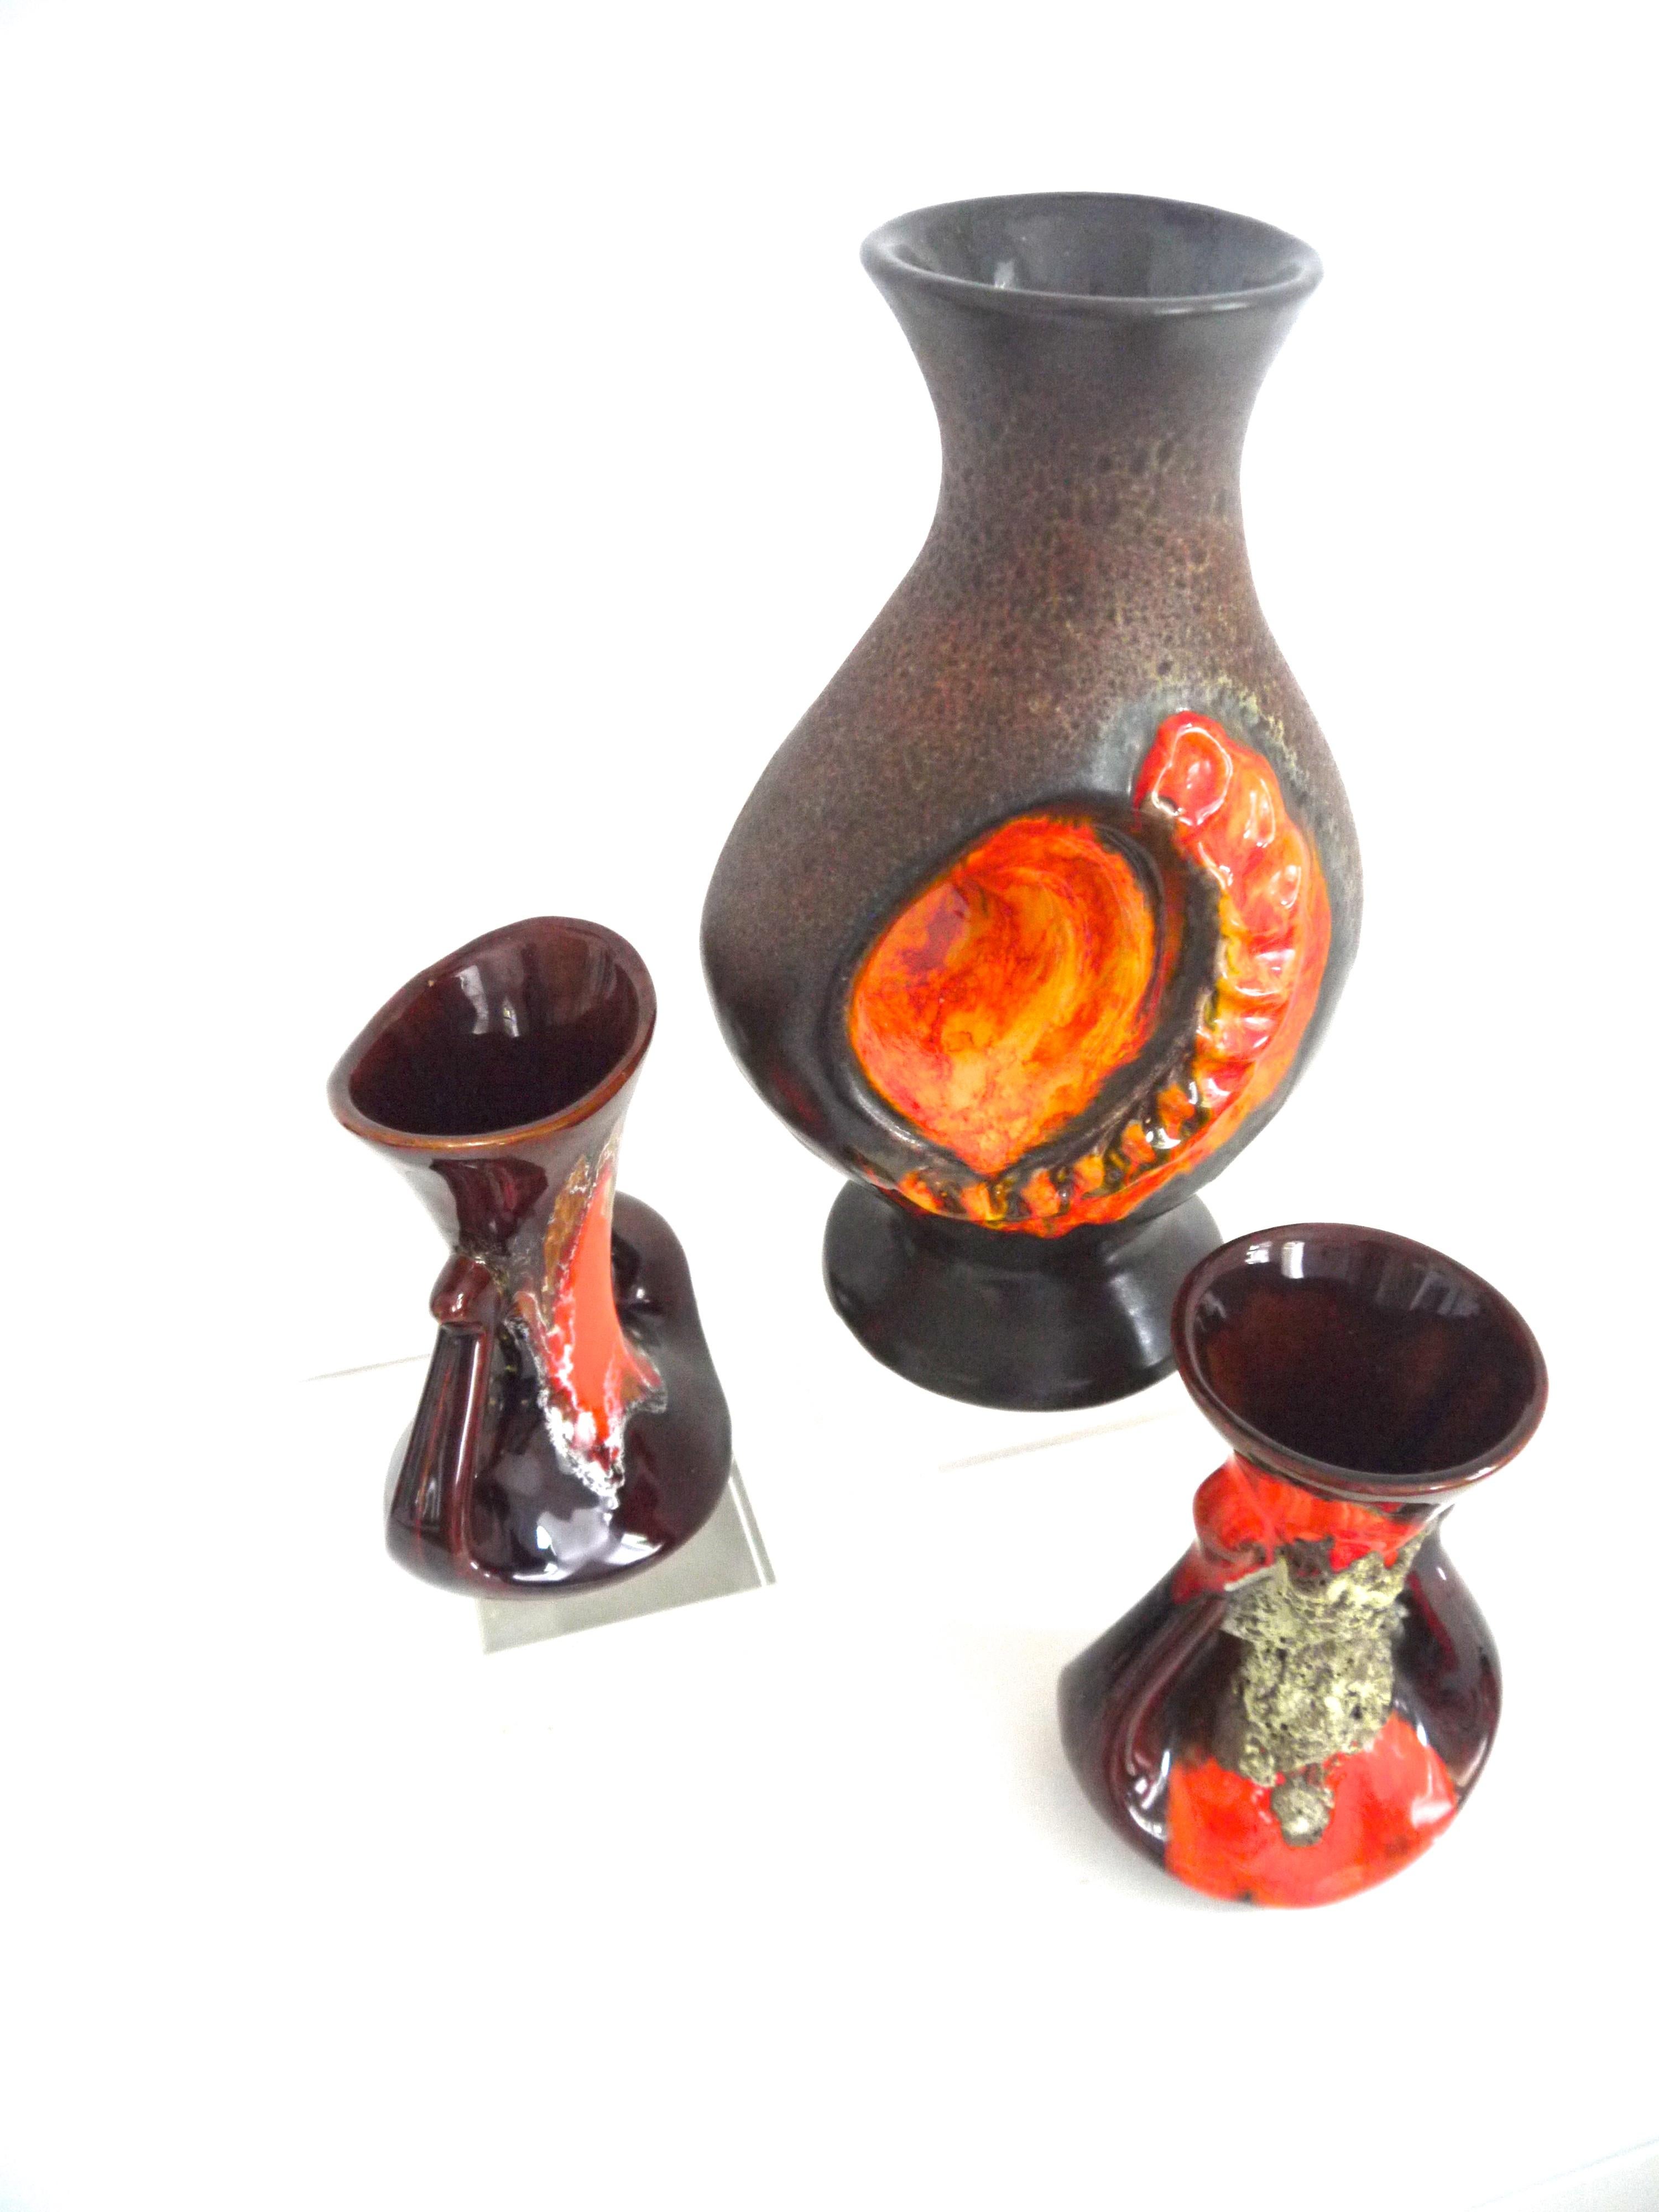 Fat Lava collection Walther Gerhards vase with two smaller pieces from Vallauris mid to late 1960s.
The first “lava”glaze appeared in 1967, coinciding with the sixties “summer of love”, so the bold colors, textures and vivid abstract styles were